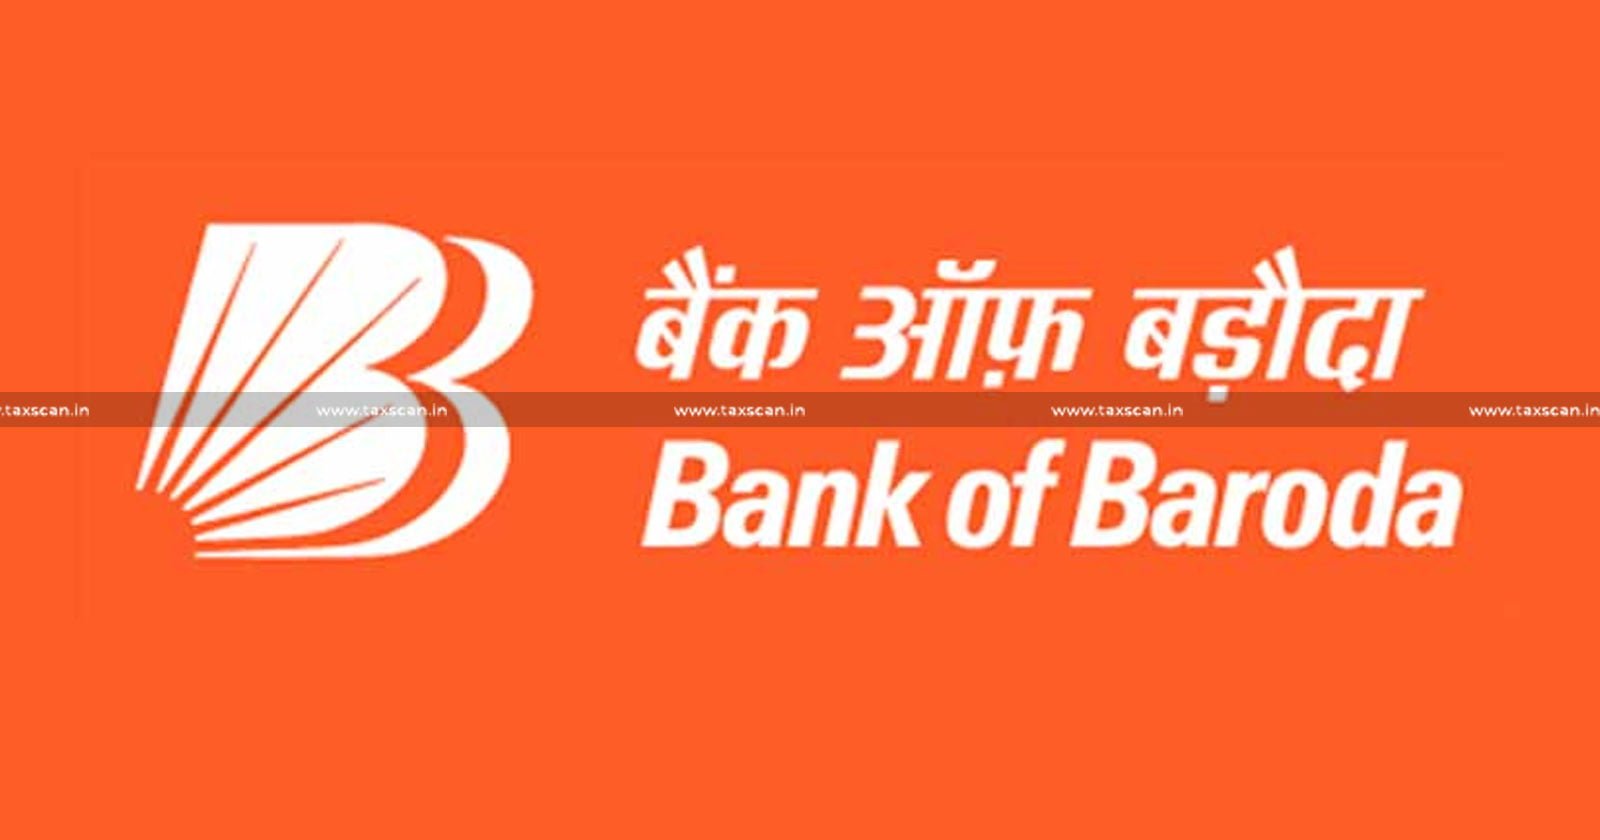 No enhanced cost paid for Transfer of Textile - Spinning Unit acquired through Auction Sale of Bank of Baroda - ITAT allows Depreciation - TAXSCAN